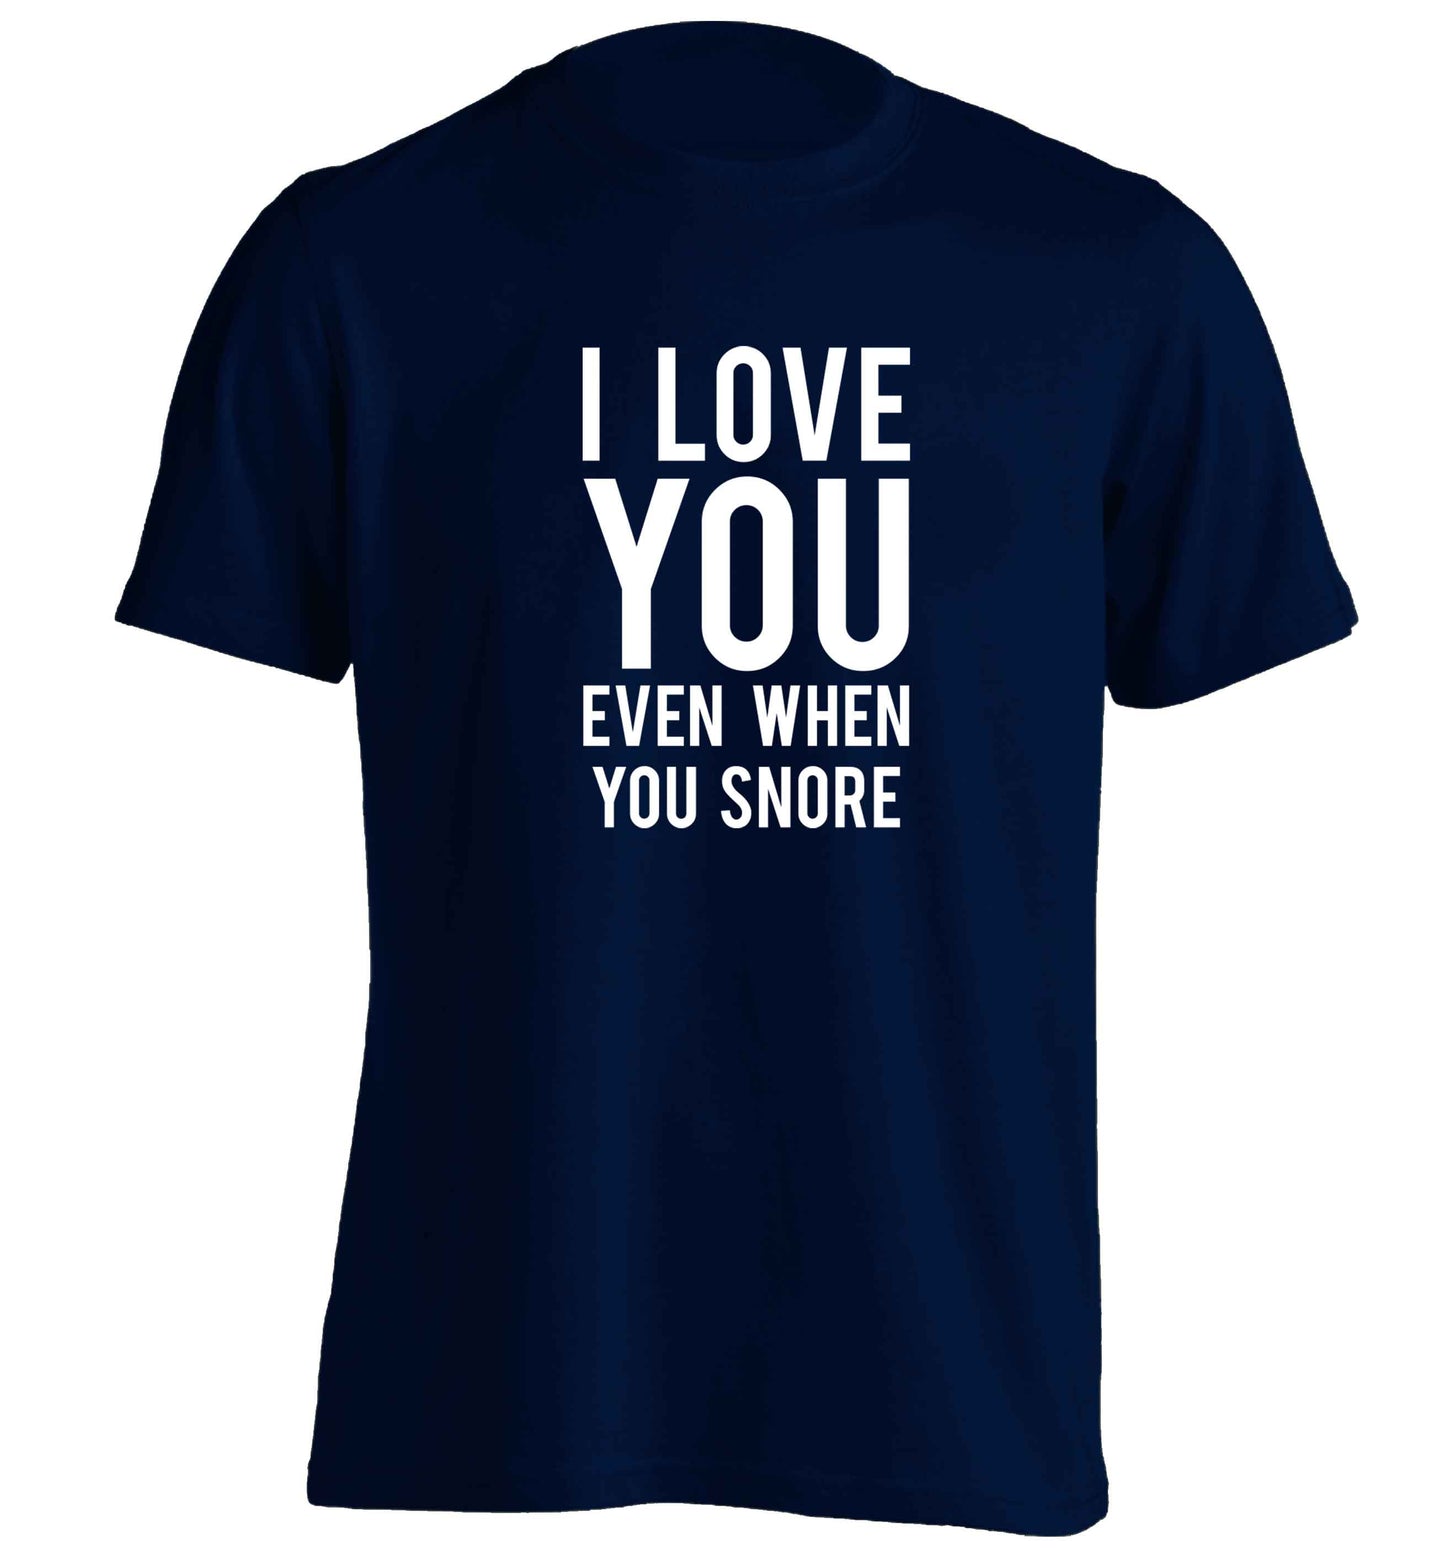 I love you even when you snore adults unisex navy Tshirt 2XL